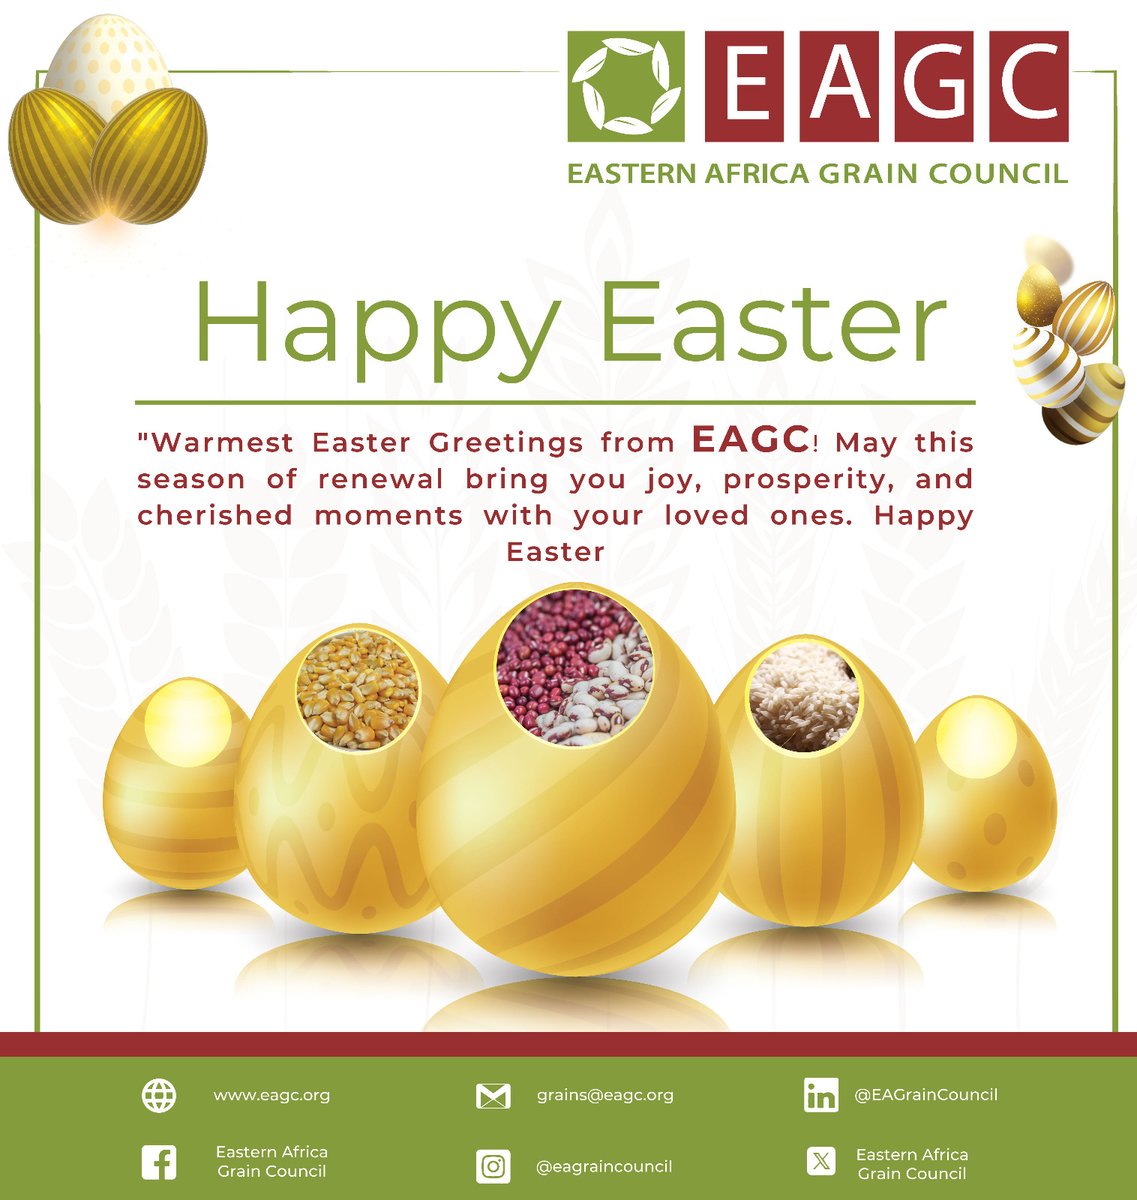 Happy Easter from #EasternAfricaGrainCouncil! May this season of renewal bring you joy, prosperity and cherished moments with your loved ones.